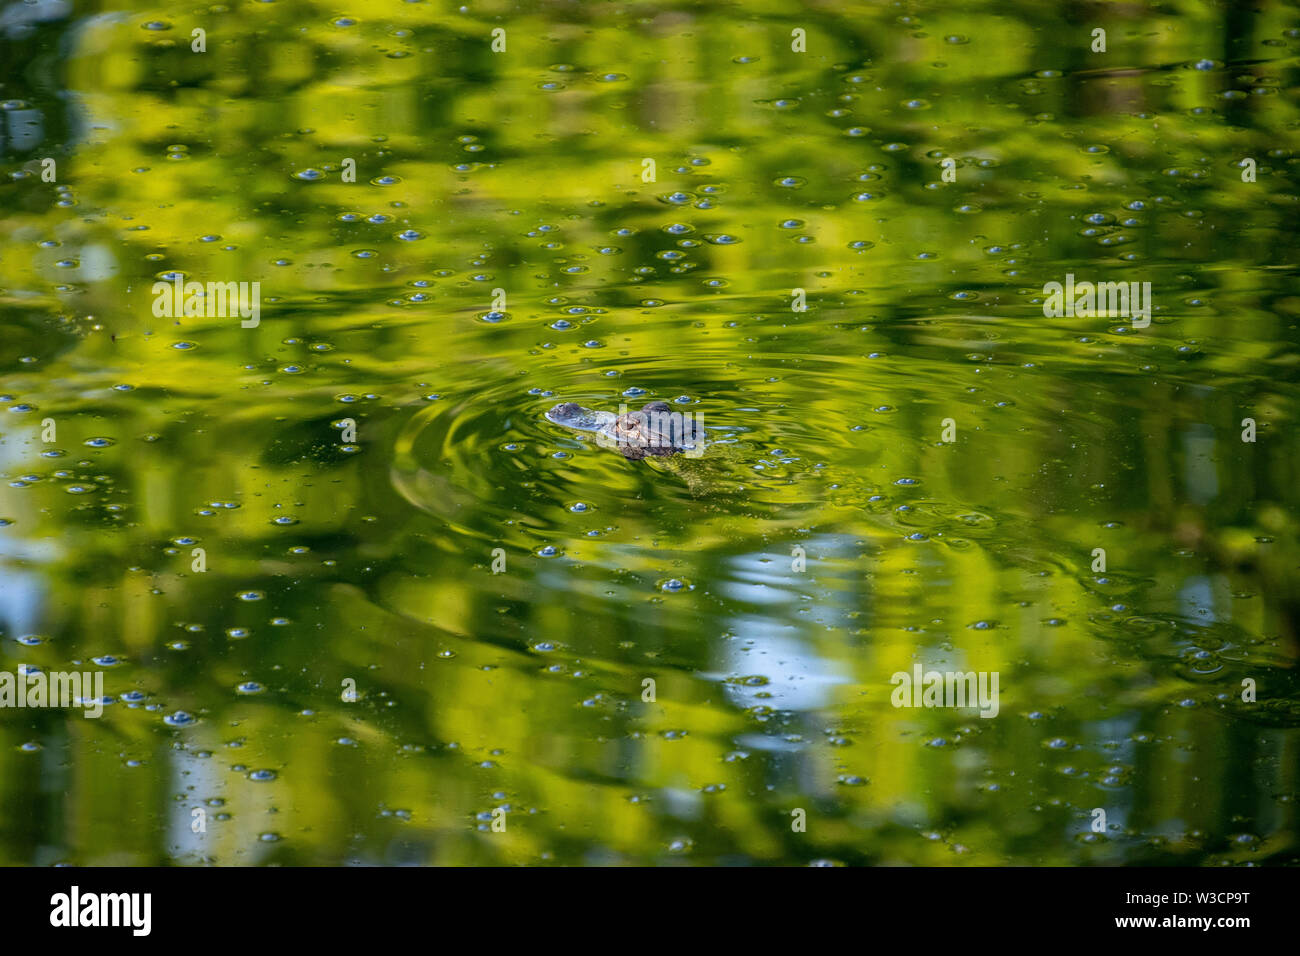 A small alligator swimming in green water with only its head peaking above the water Stock Photo